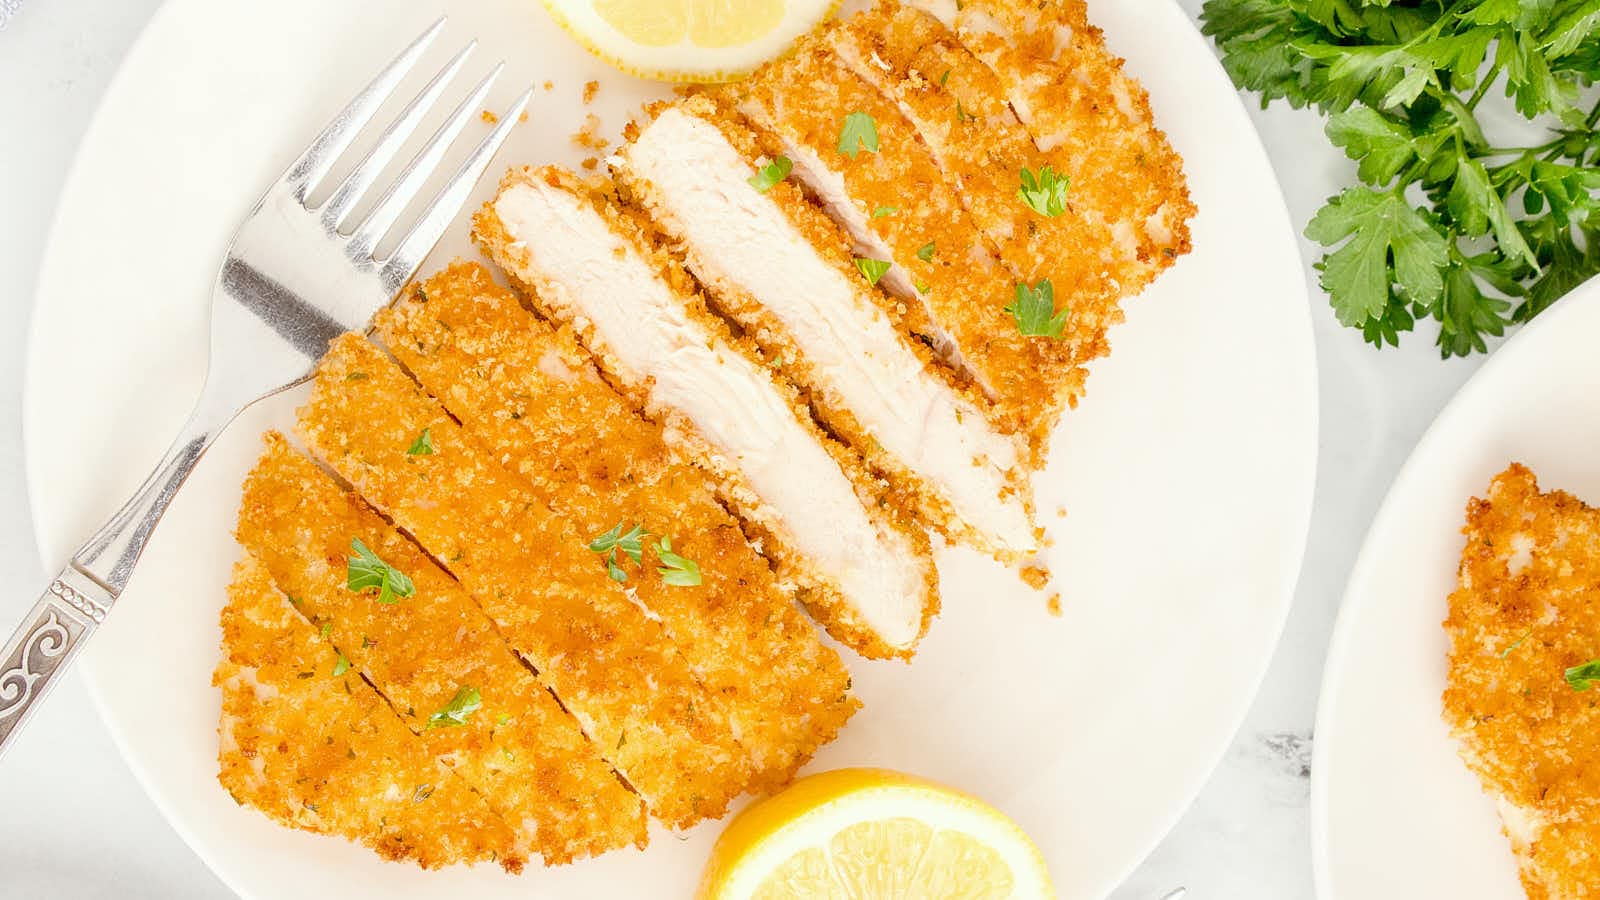 Air Fryer Chicken Cutlets recipe by Cheerful Cook.